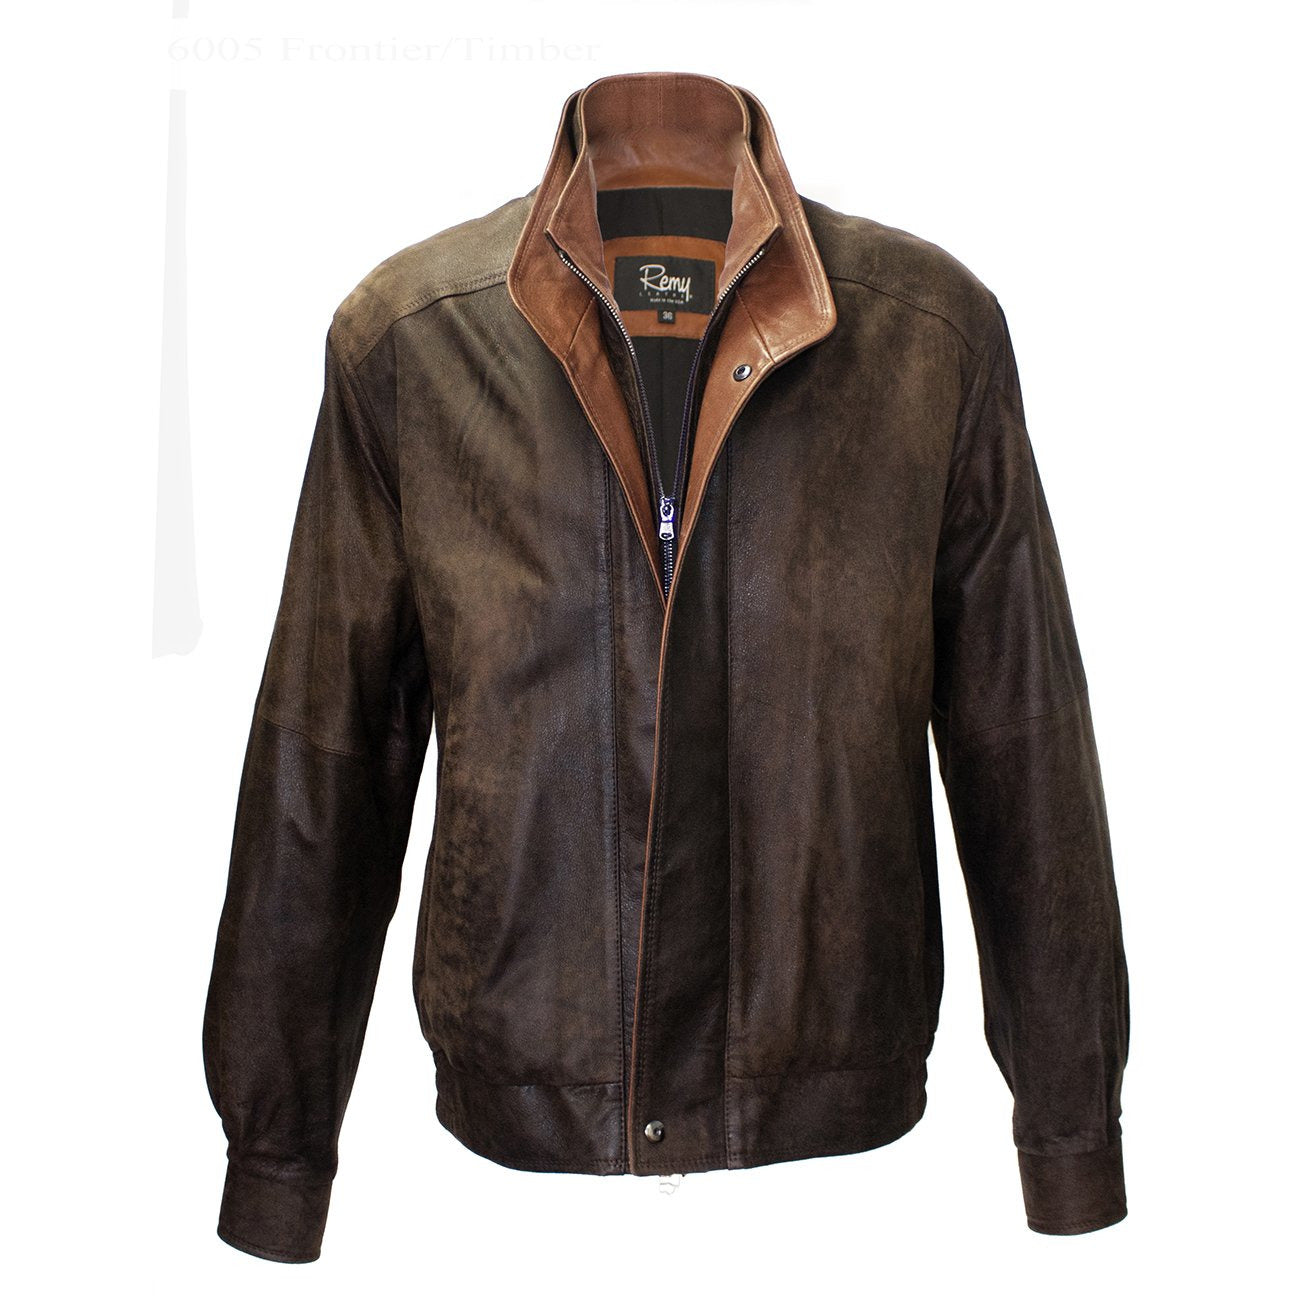 6005 - Men's Leather Double Collar Bomber Jacket | Frontier/Timber